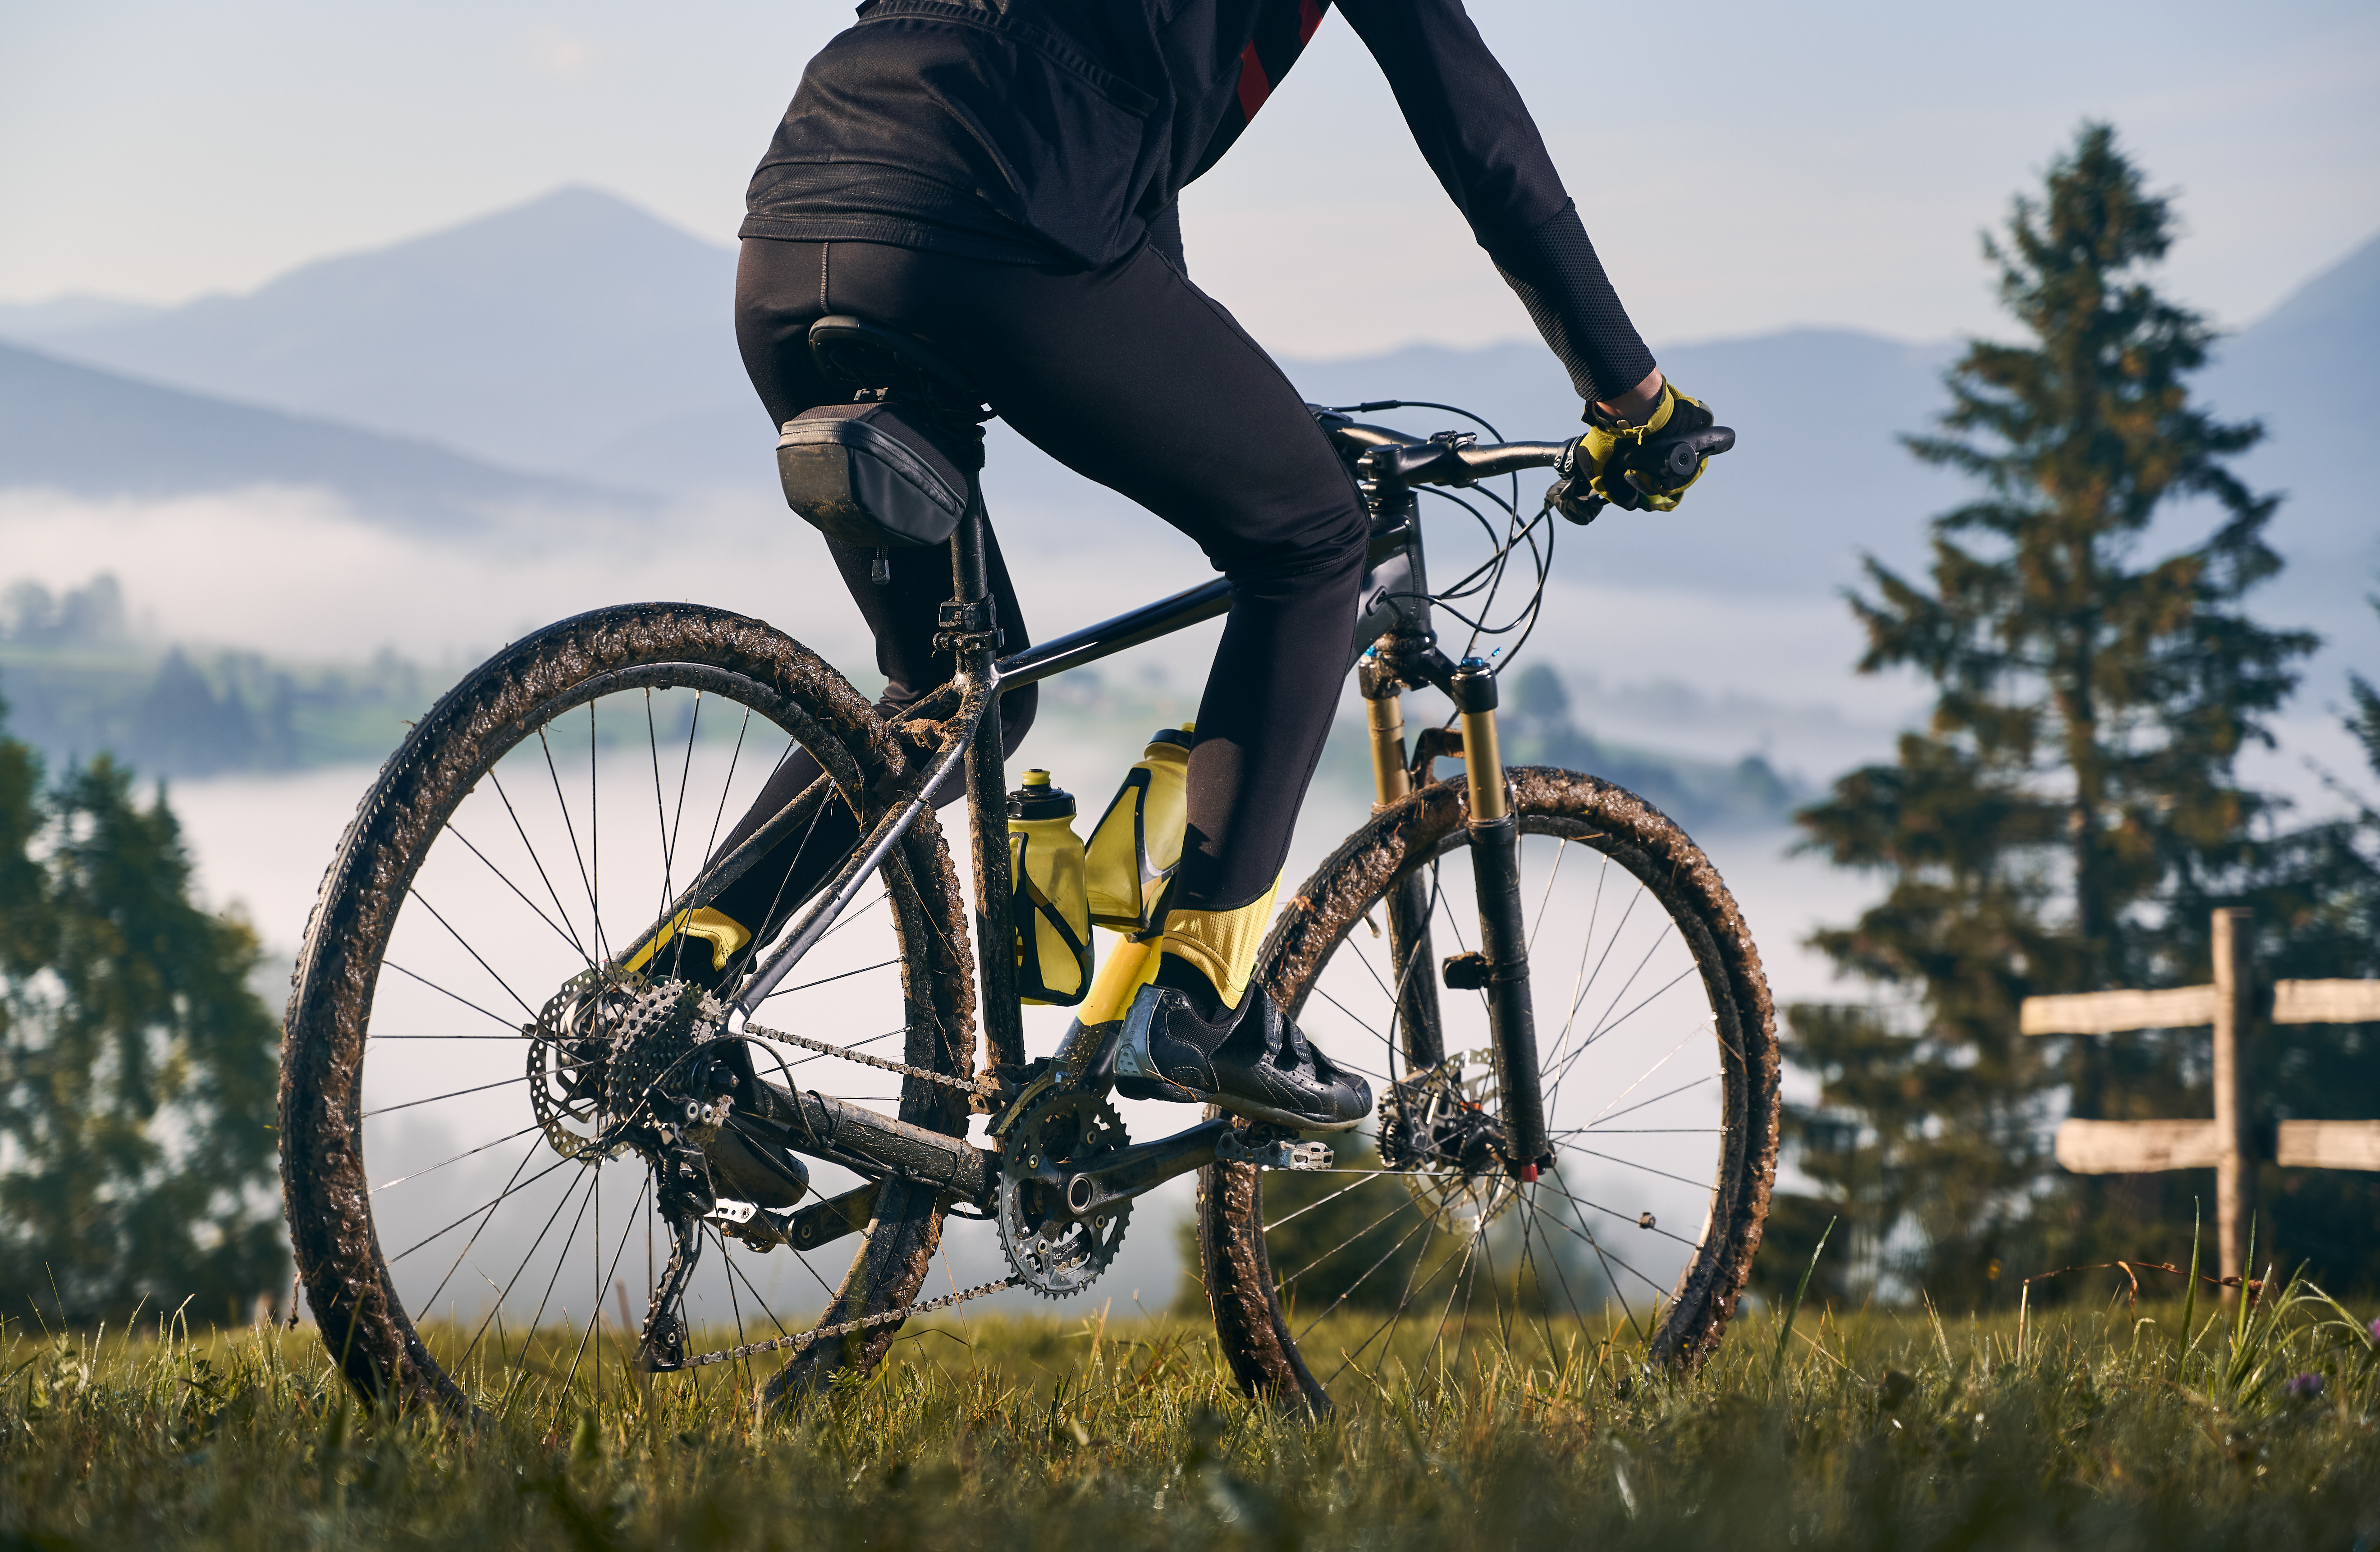 Close up view of man cyclist in cycling suit riding bicycle on grassy hill. View of majestic mountains on the blurred background. Concept of sport, bicycling and nature.